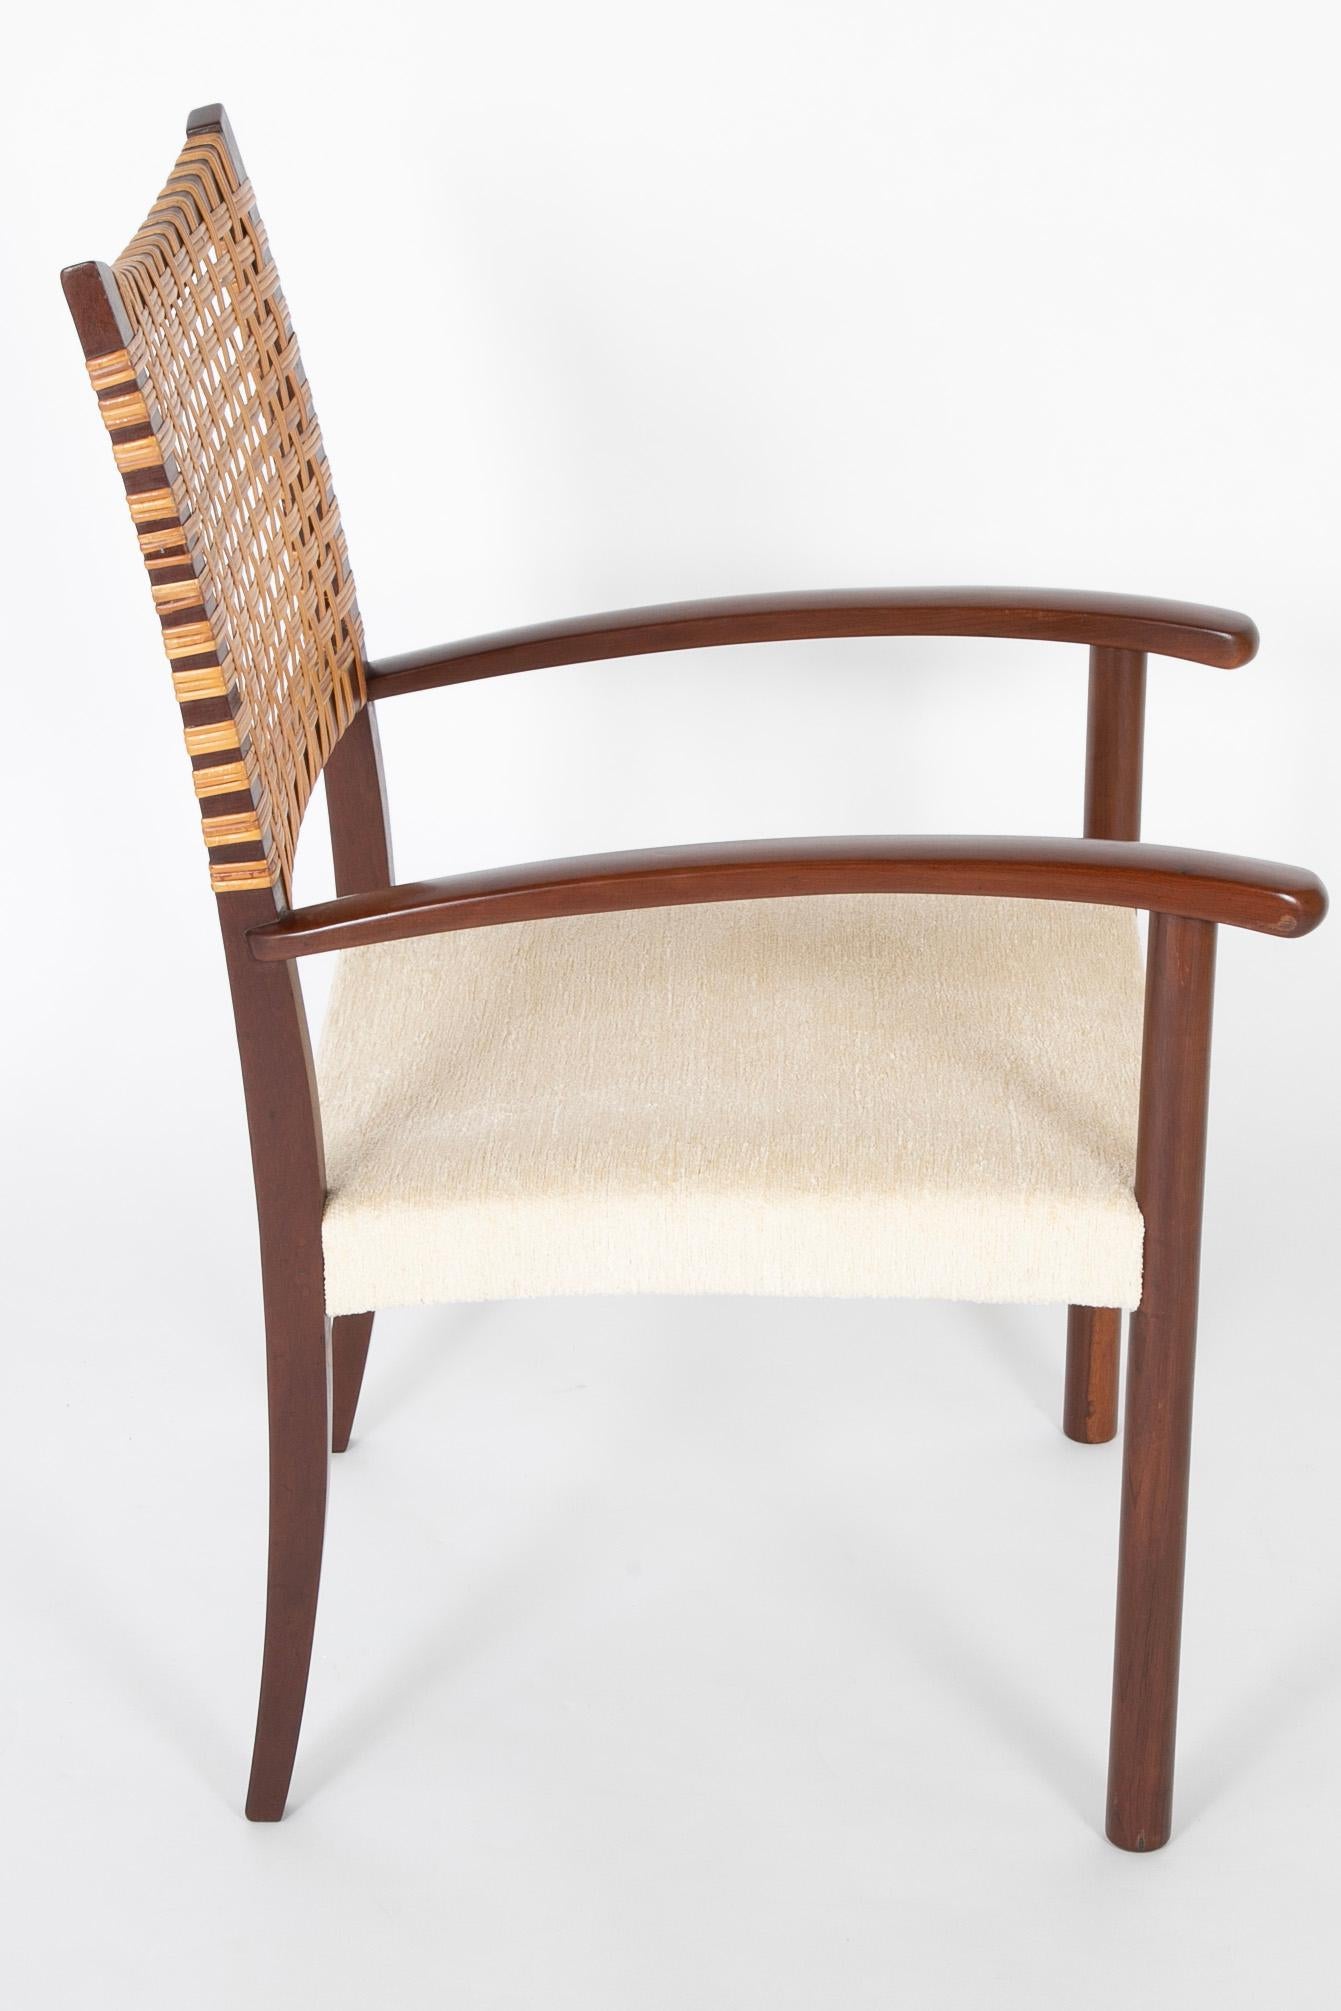 Pair of Open Arm Chairs with Caned Backs by Adolfo Foltas For Sale 1